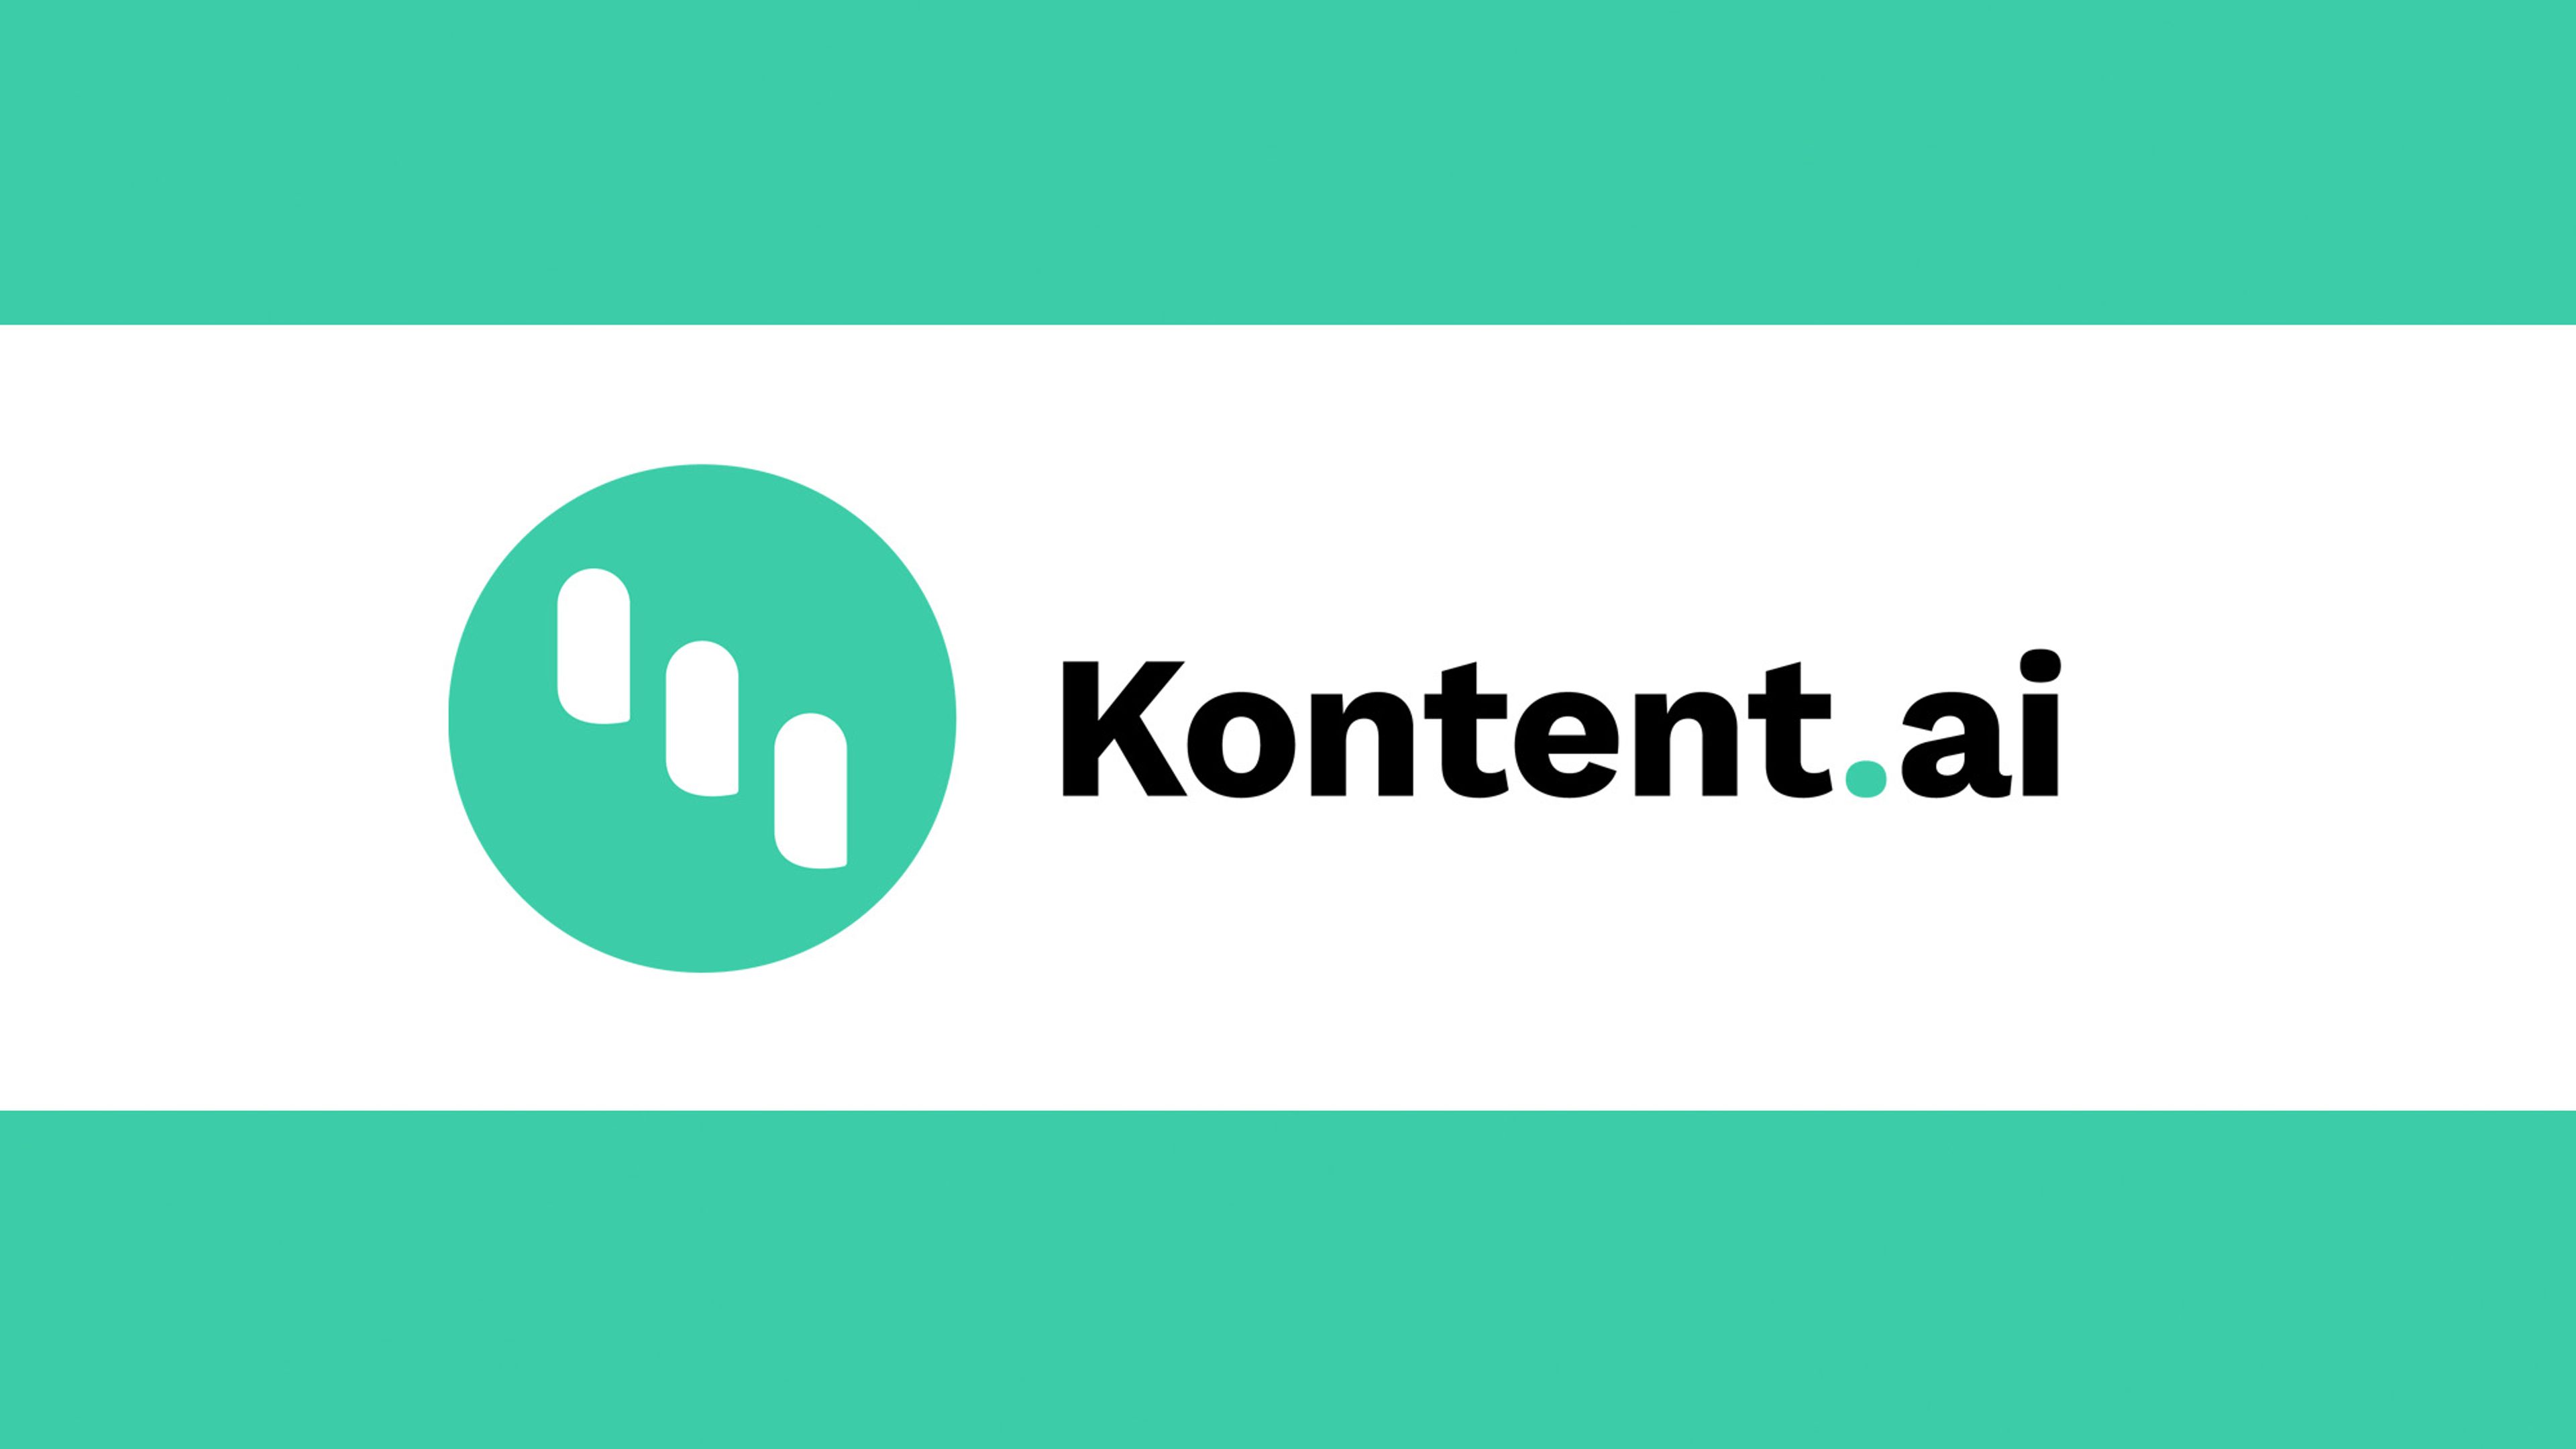 Kontent.ai logo against a white and turquoise background